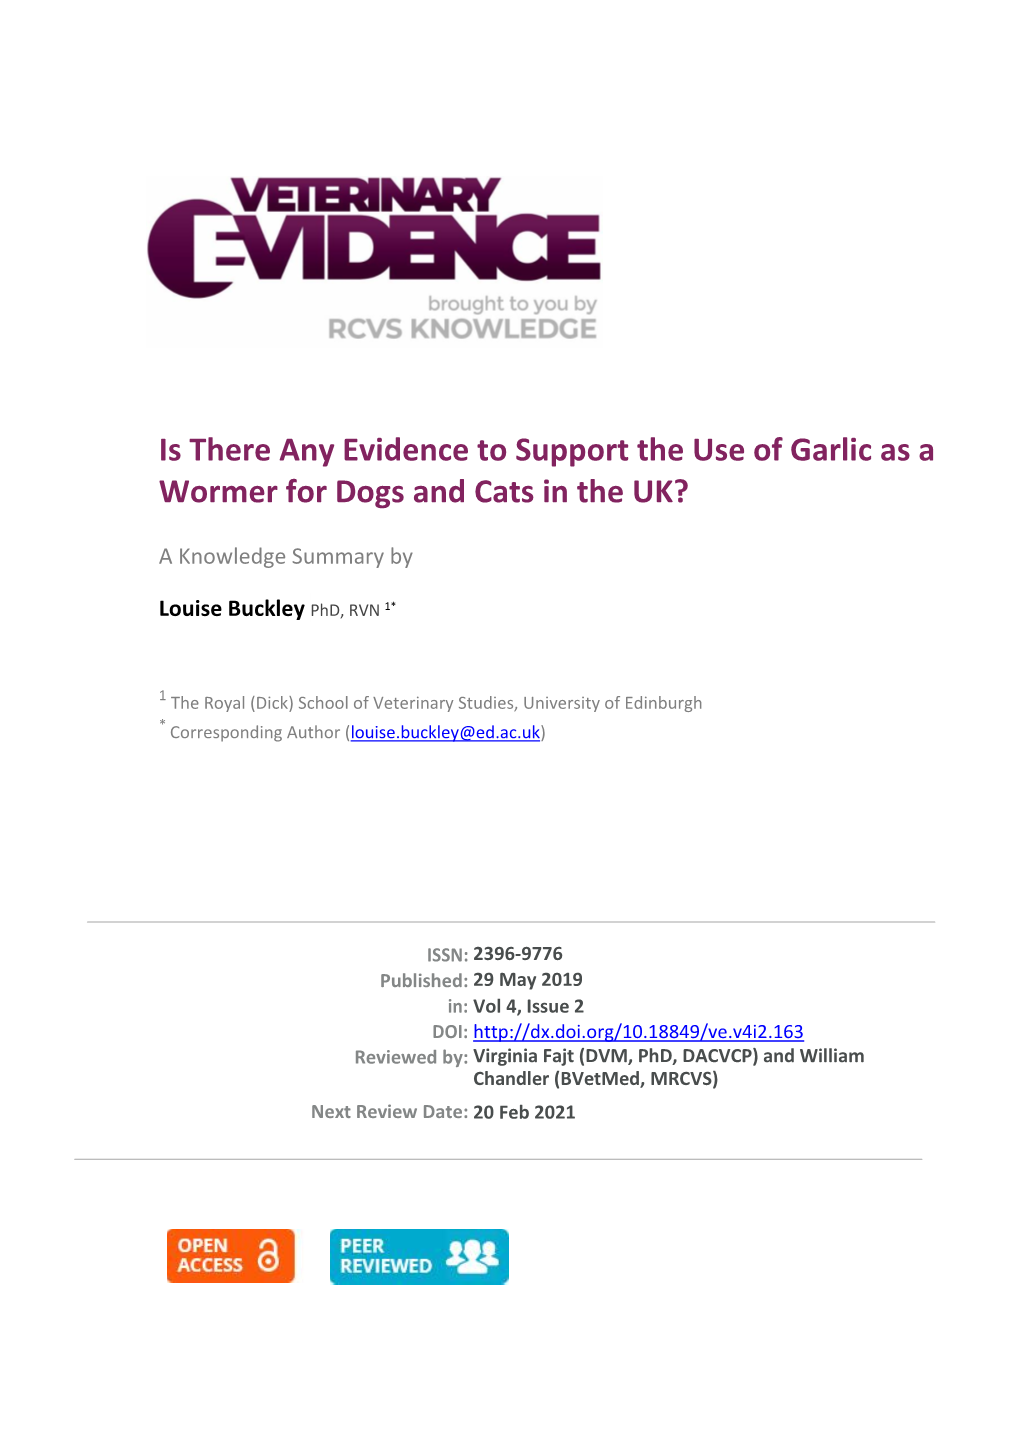 Is There Any Evidence to Support the Use of Garlic As a Wormer for Dogs and Cats in the UK?